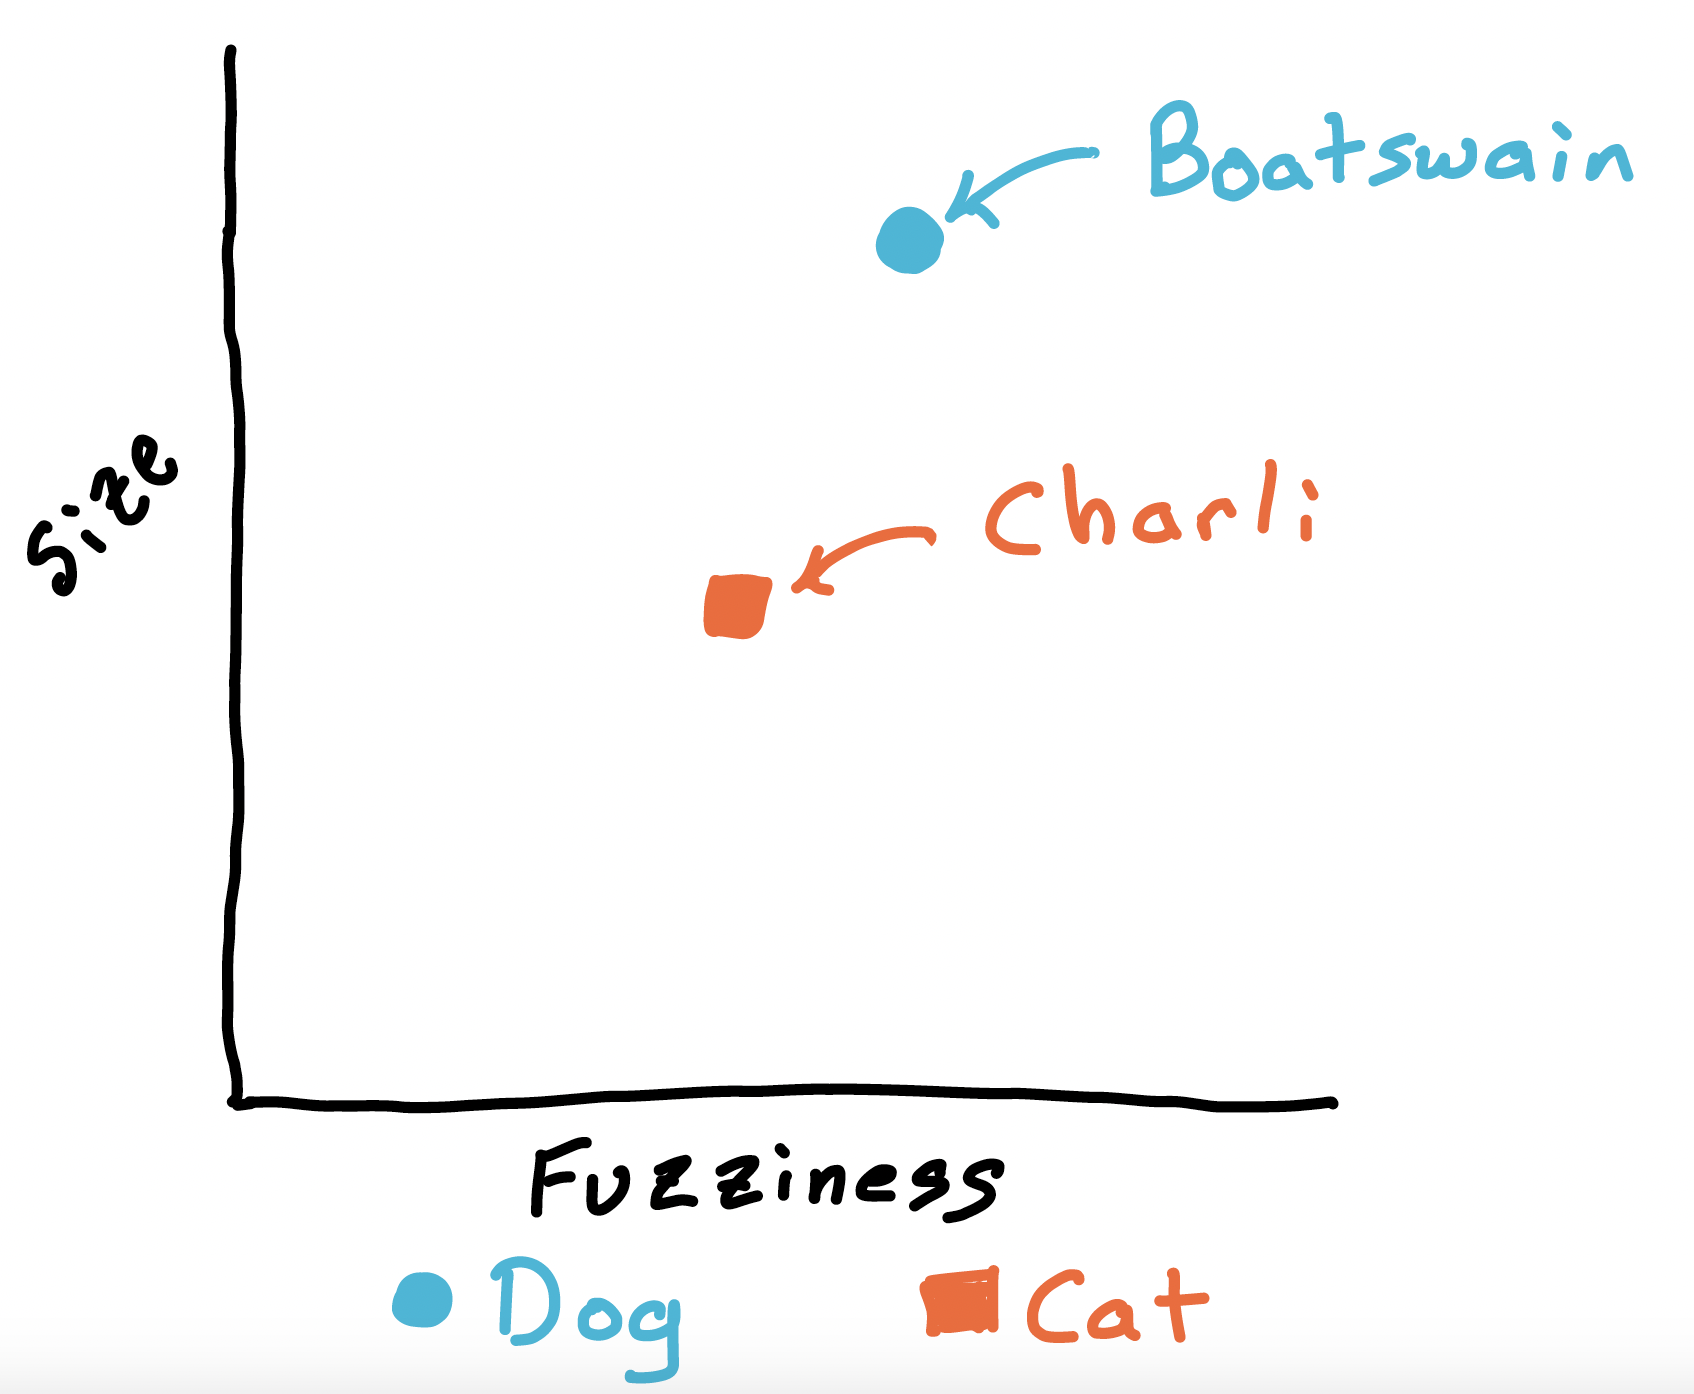 Dogs and Cats: Size vs. Fuzziness